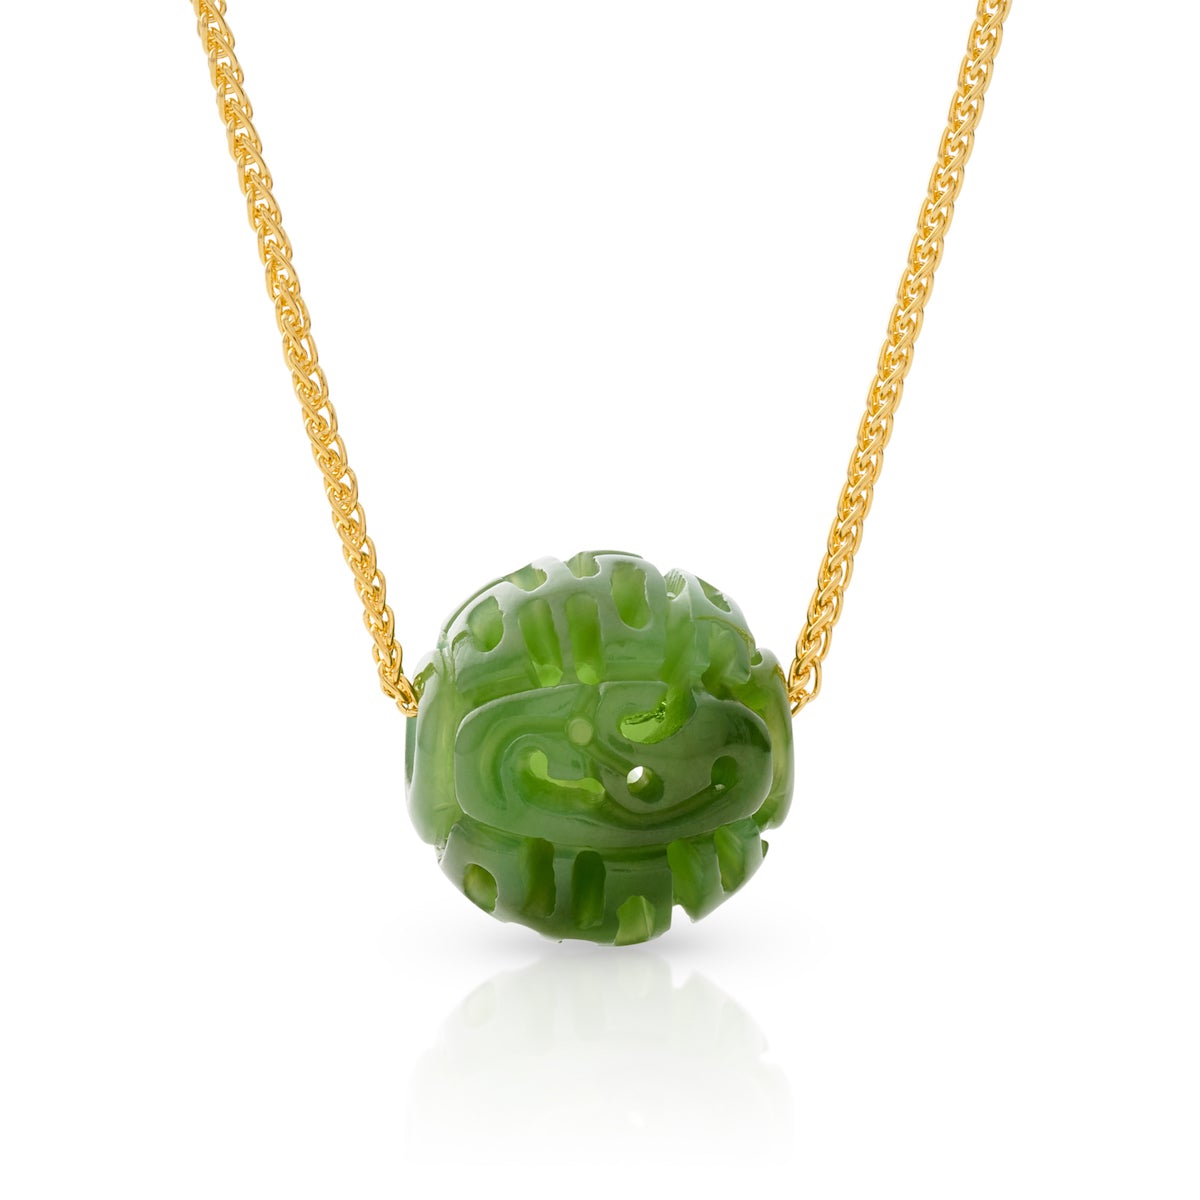 14ct Yellow Gold Nephrite Jade Bead Necklace - Chilton's Antiques